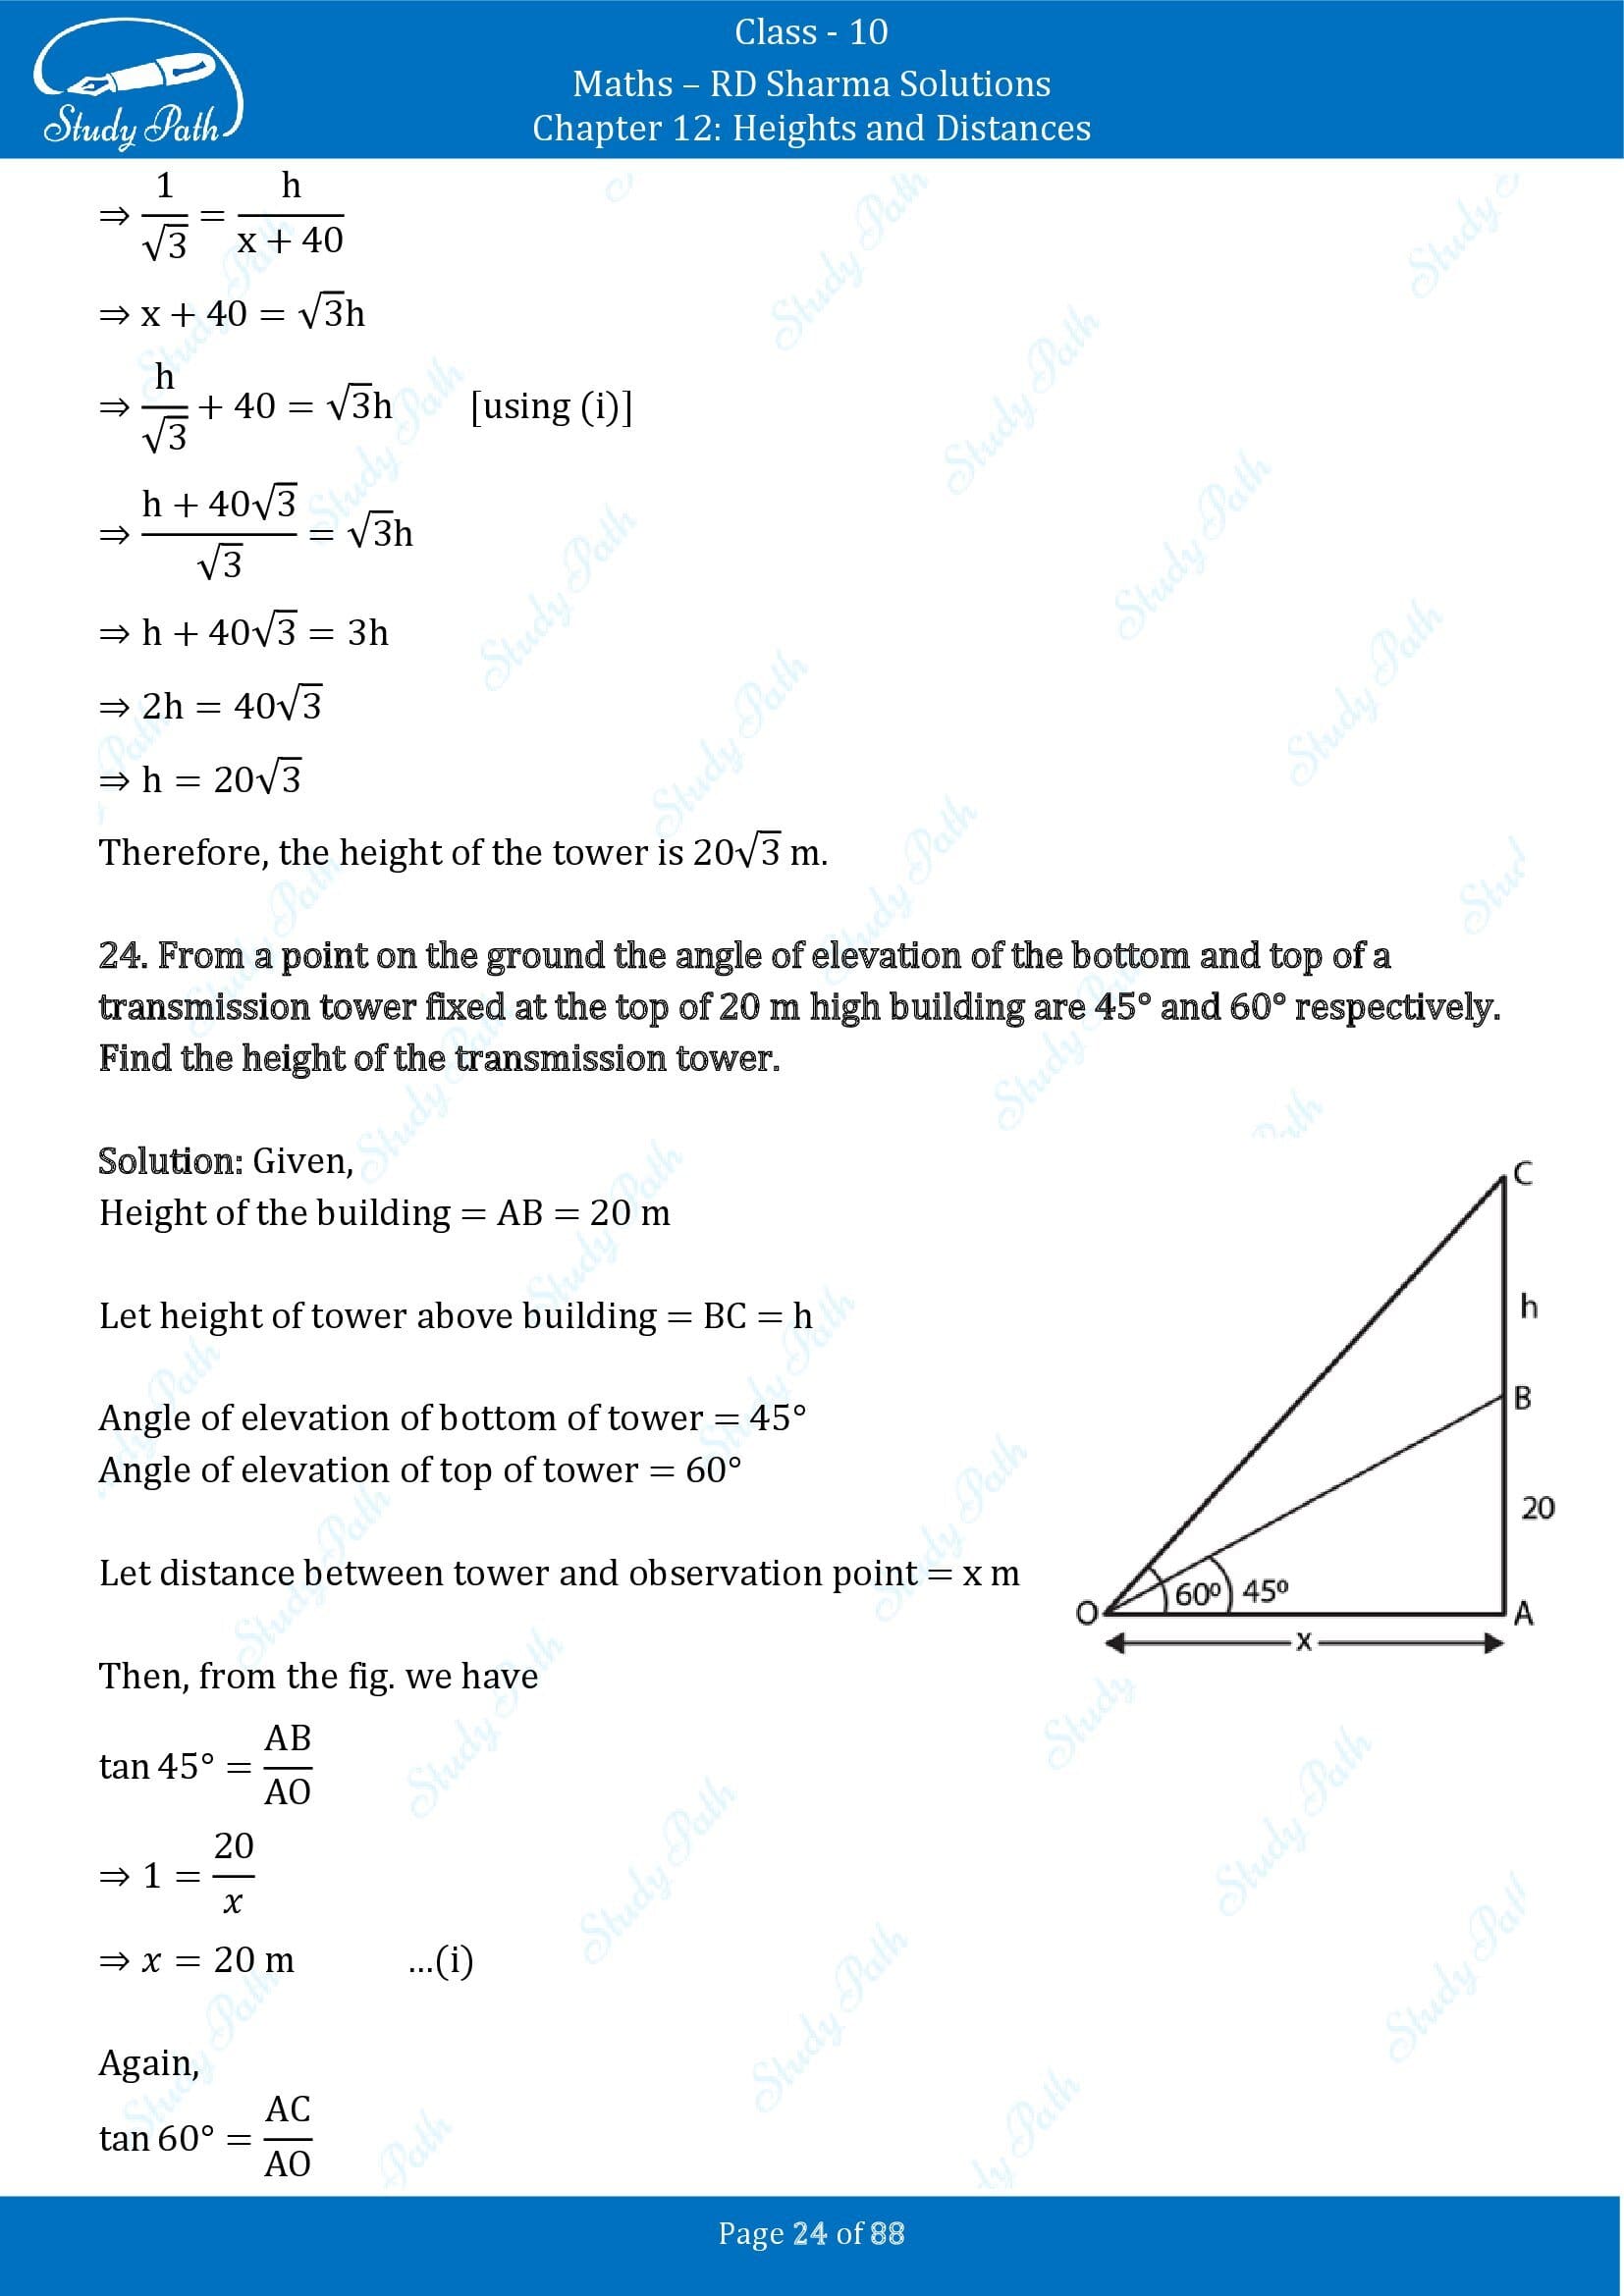 RD Sharma Solutions Class 10 Chapter 12 Heights and Distances Exercise 12.1 00024